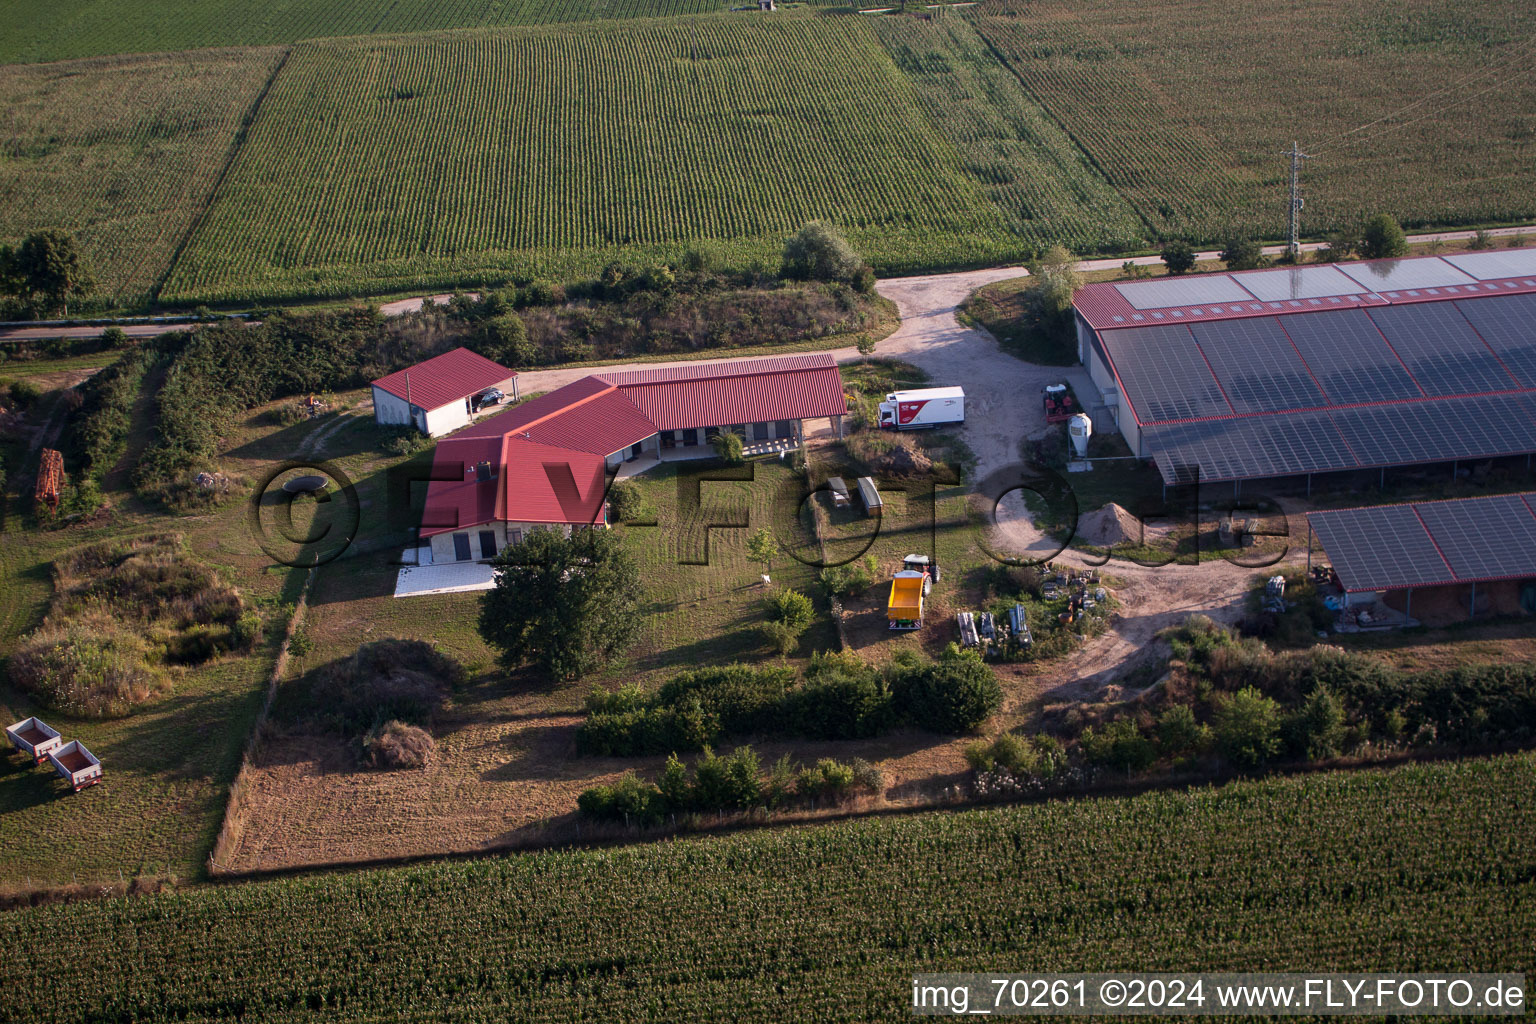 Aerial photograpy of Chicken farm Aussiedlerhof in Erlenbach bei Kandel in the state Rhineland-Palatinate, Germany